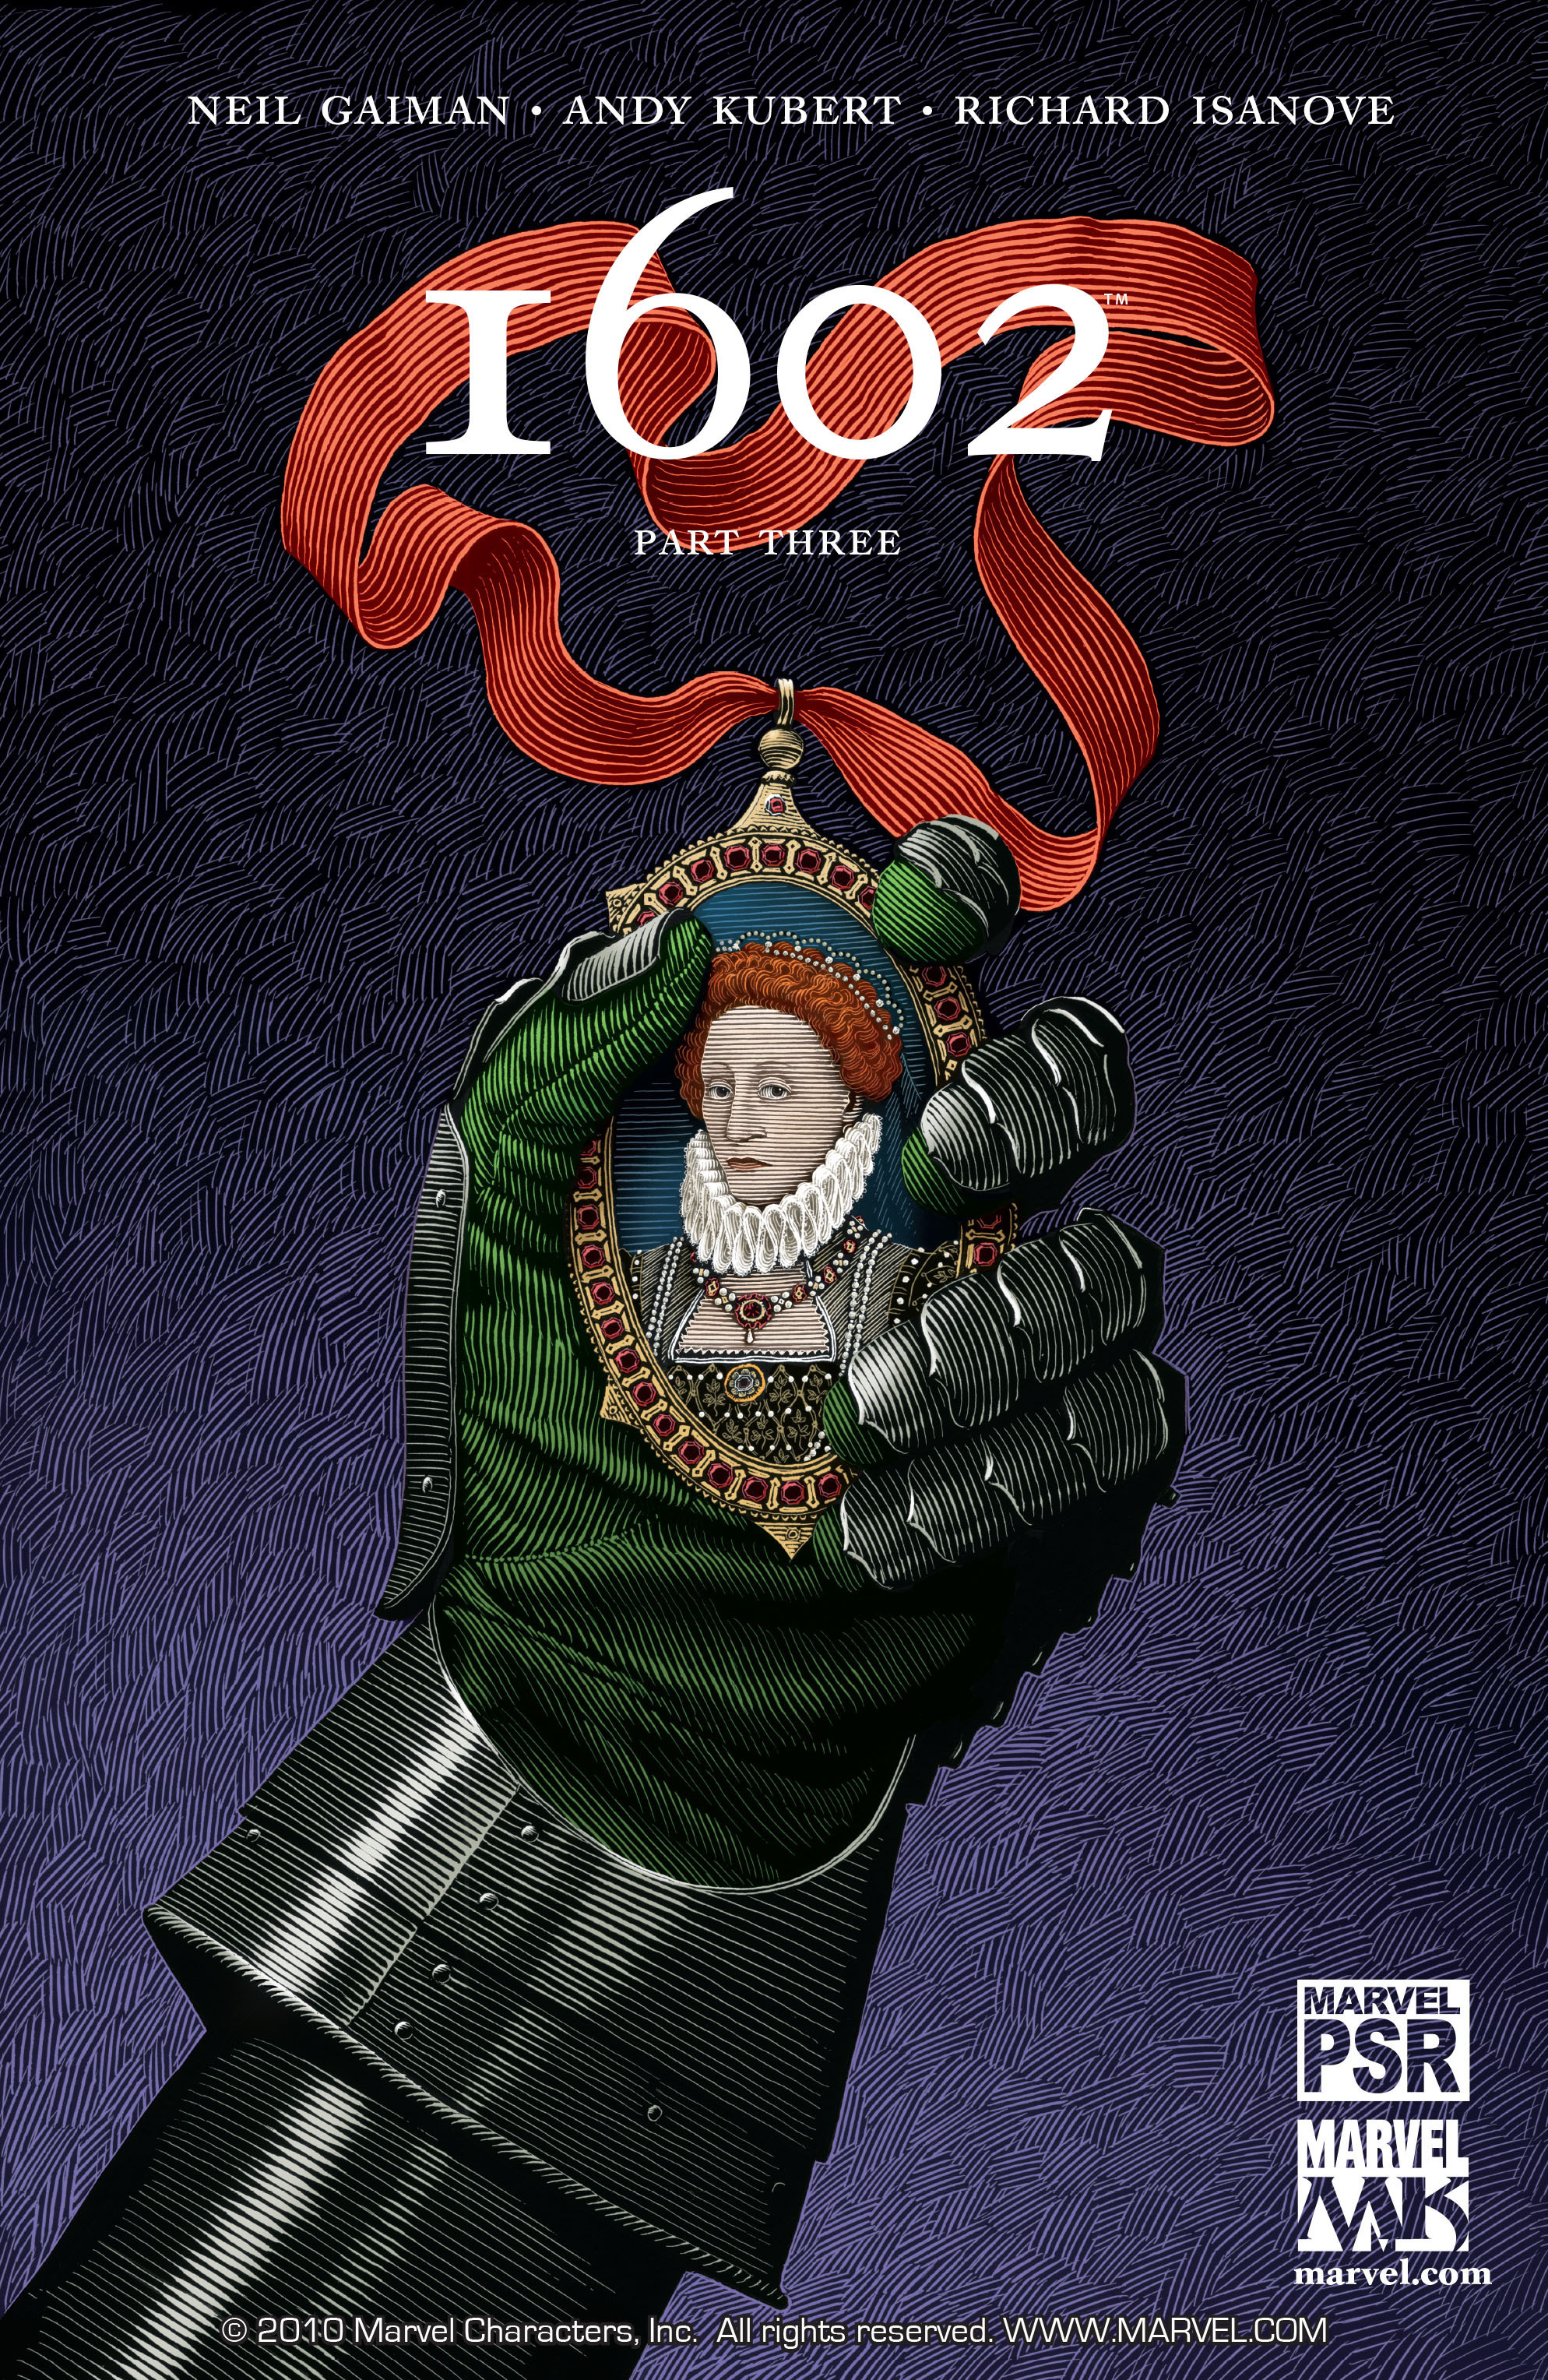 Read online Marvel 1602 comic -  Issue #3 - 1